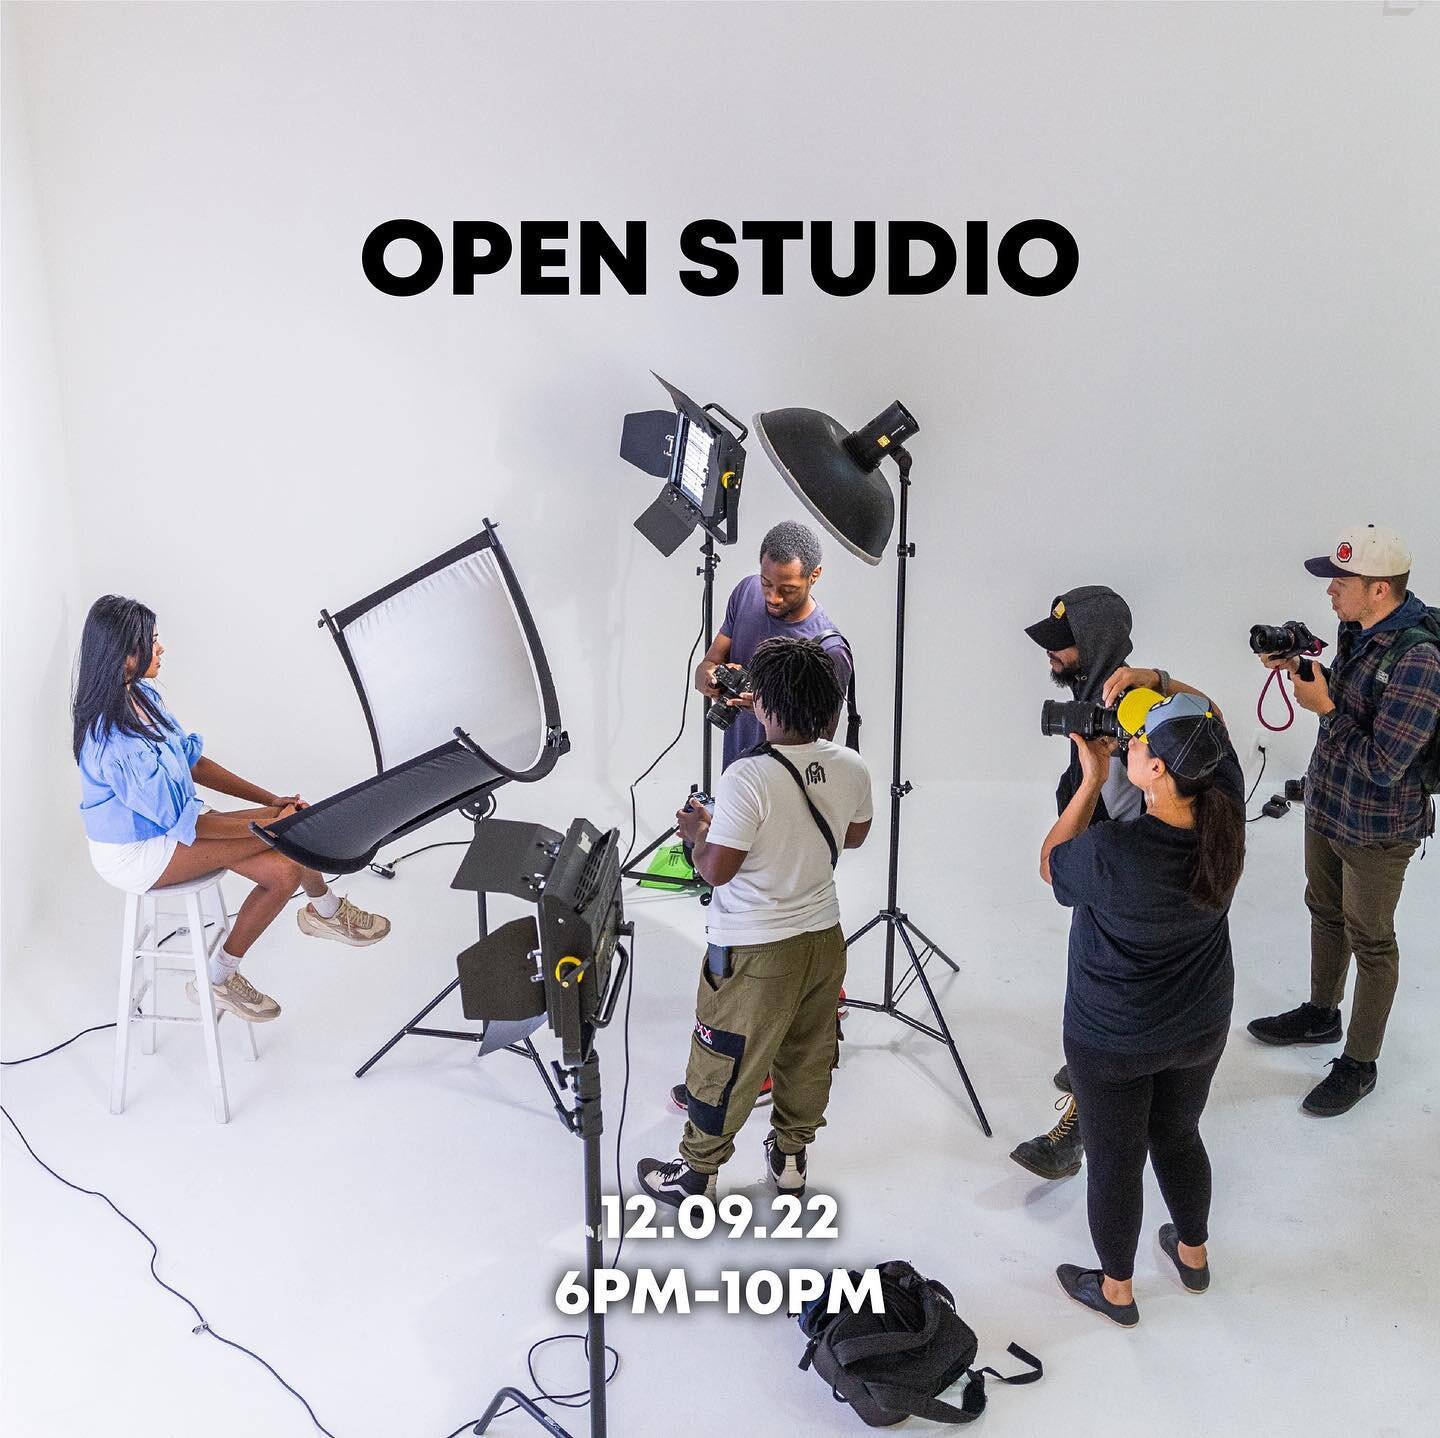 Join us at Chil Studios on Friday, December 9th, for our LAST Creative Open Studio Event of the year. The event is open to photographers, videographers, models, and all other creatives. Head over to @fourofour.co to RSVP today! Link in their bio. 🎟️